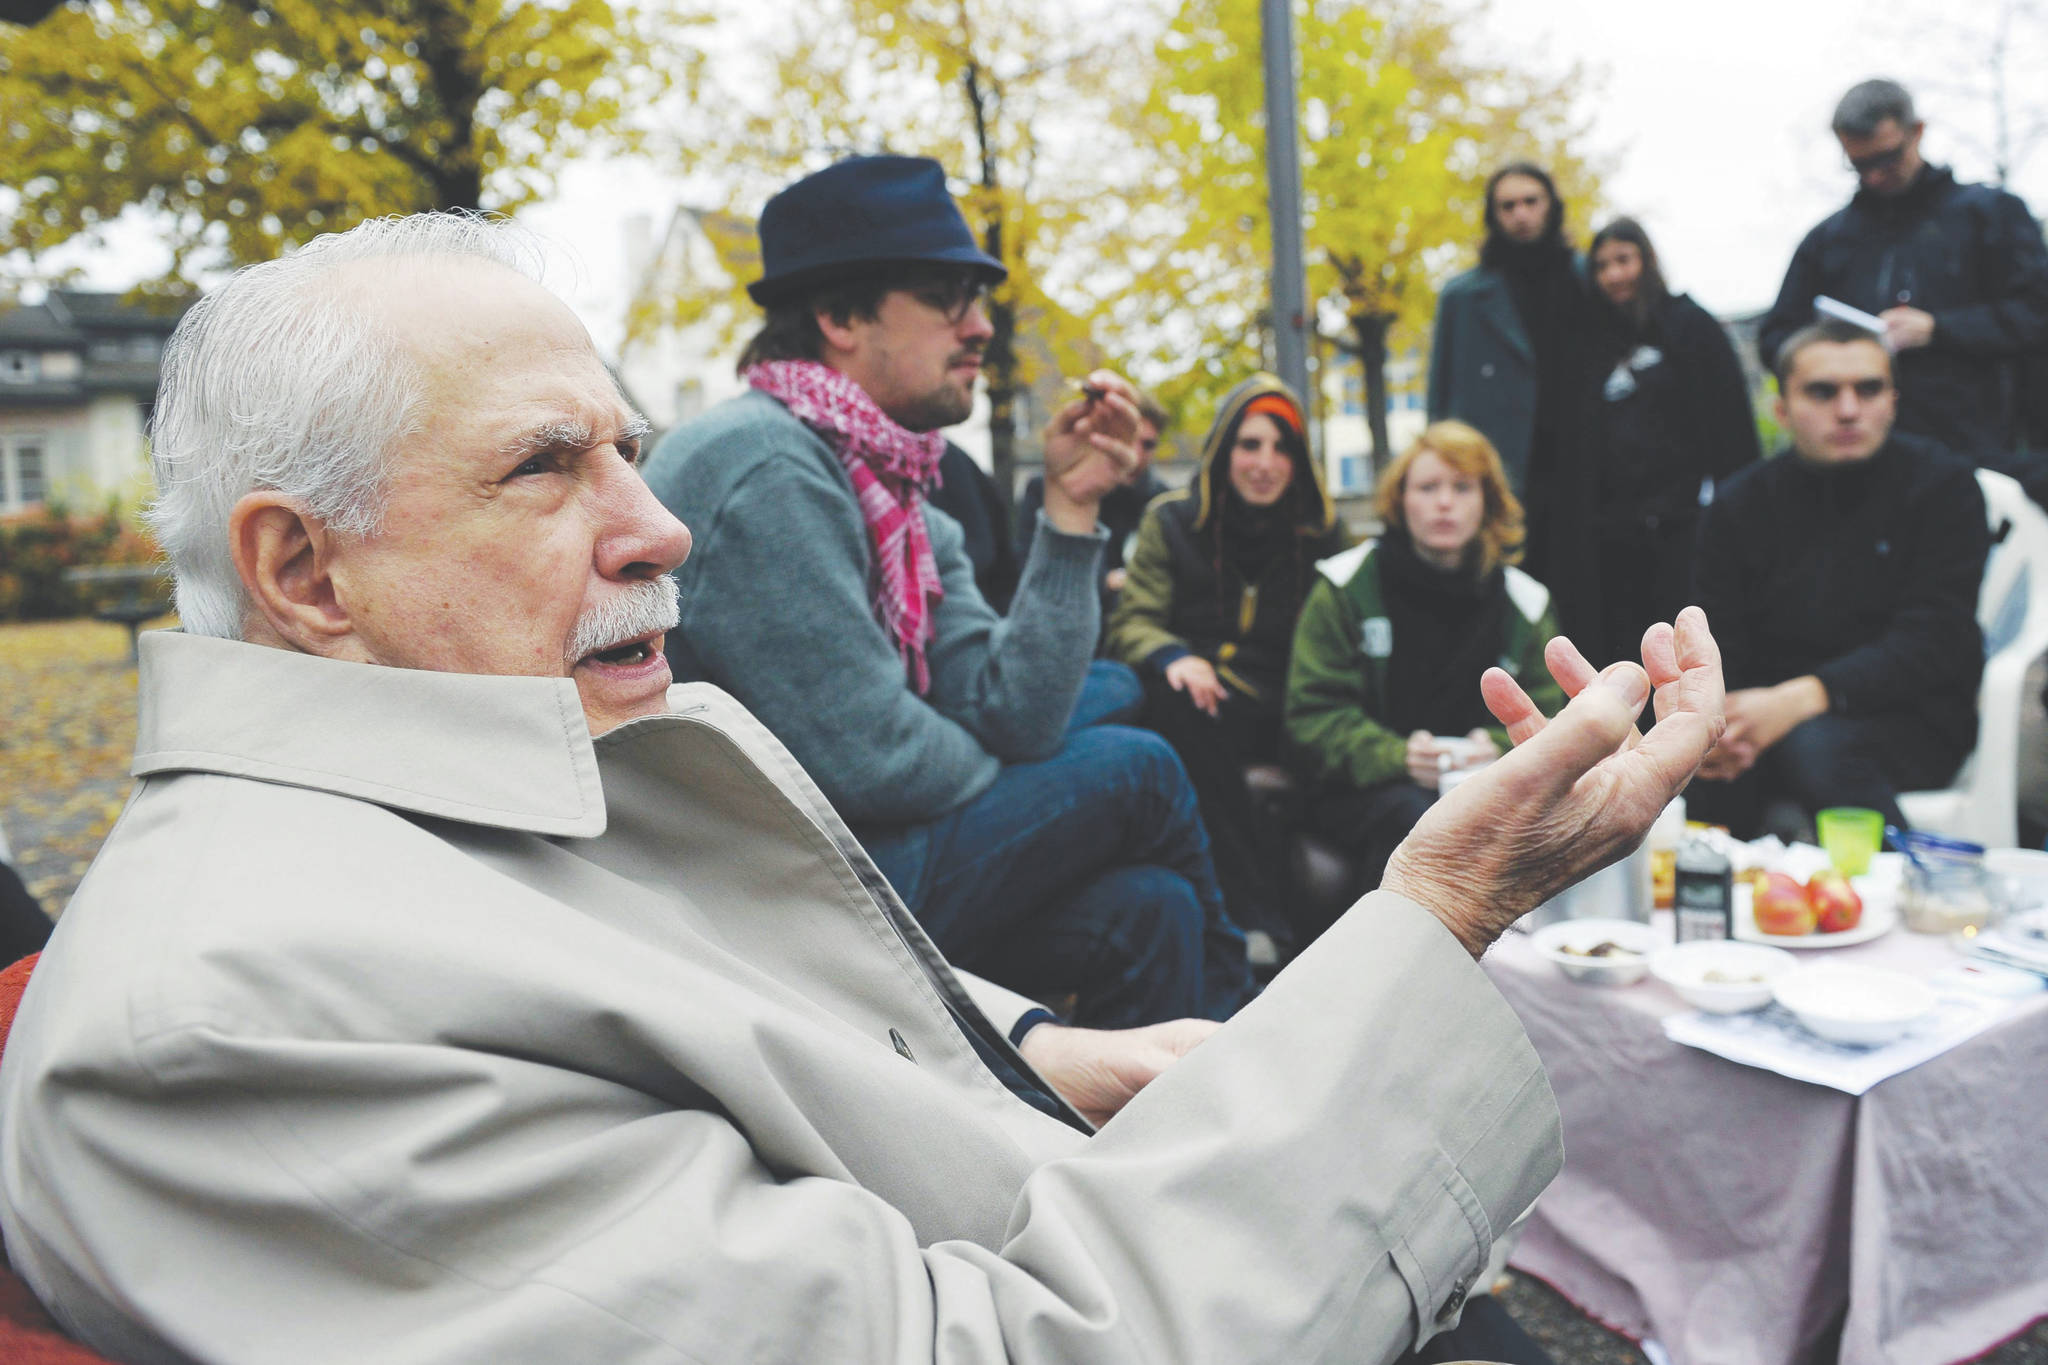 Former Democratic U.S. senator Mike Gravel gestures while talking to “Occupy” activists at Lindenhof square in Zurich, Switzerland, in this Monday, Oct. 31, 2011, file photo. Gravel, a former U.S. senator from Alaska who read the Pentagon Papers into the Congressional Record and confronted Barack Obama about nuclear weapons during a later presidential run, has died. He was 91. Gravel, who represented Alaska as a Democrat in the Senate from 1969 to 1981, died Saturday, June 26, 2021. Gravel had been living in Seaside, California, and was in failing health, said Theodore W. Johnson, a former aide. (AP Photo/Keystone, Steffen Schmidt, File)